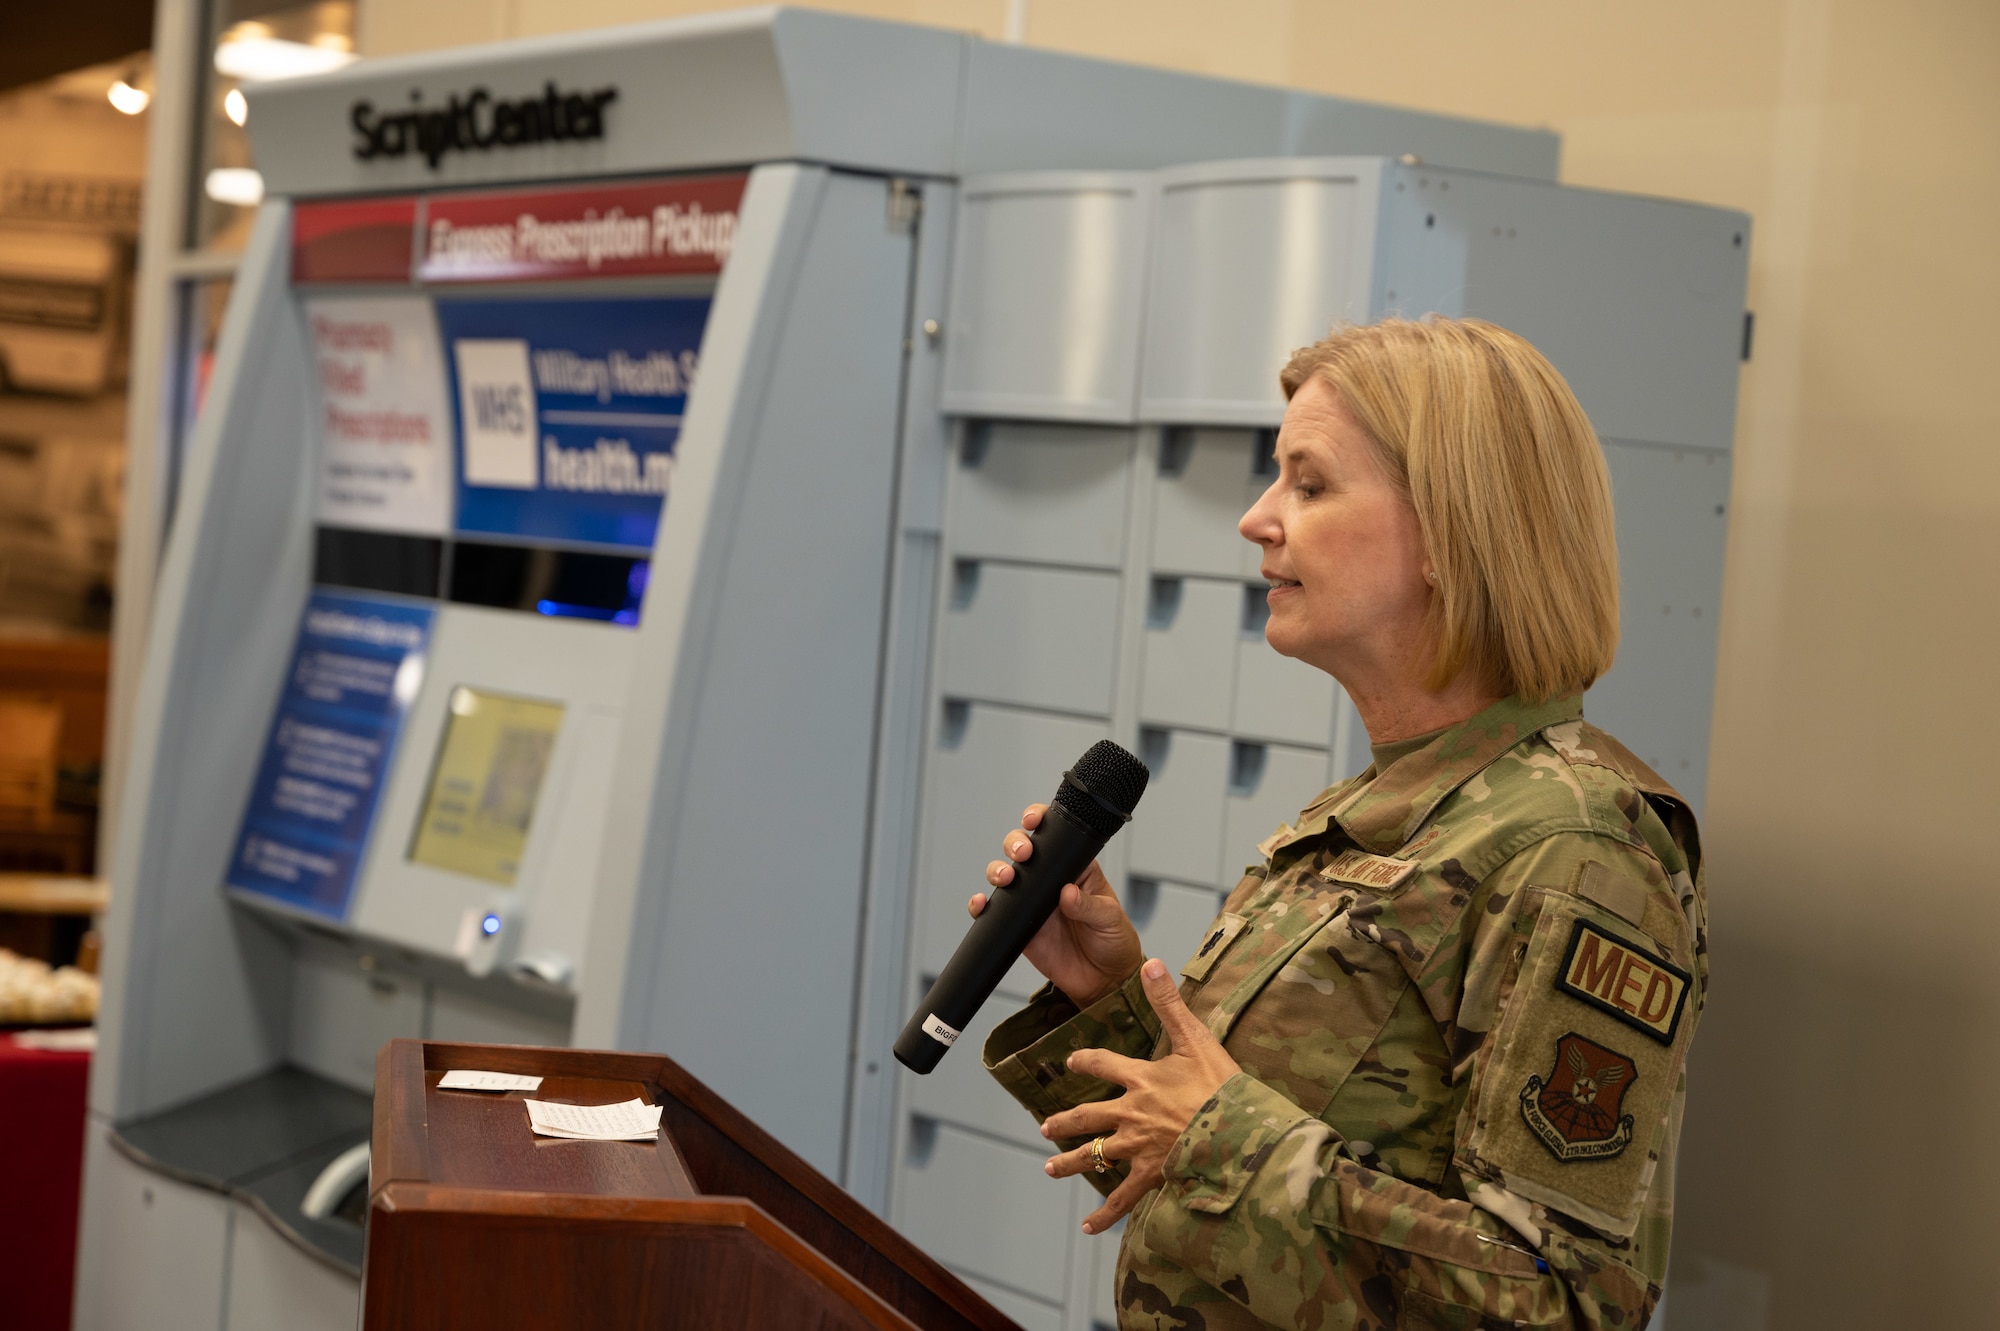 Lt. Col. Krista Hutchinson, 2nd Healthcare Operations Squadron commander, introduces the new ScriptCenter kiosk during a ribbon cutting ceremony for the pharmacy at Barksdale Air Force Base, Louisiana, Sept. 13, 2022. The kiosk provides pharmacy patients with the option to pick up eligible medications in the Base Exchange lobby during BX business hours. (U.S. Air Force photo by Senior Airman Chase Sullivan)